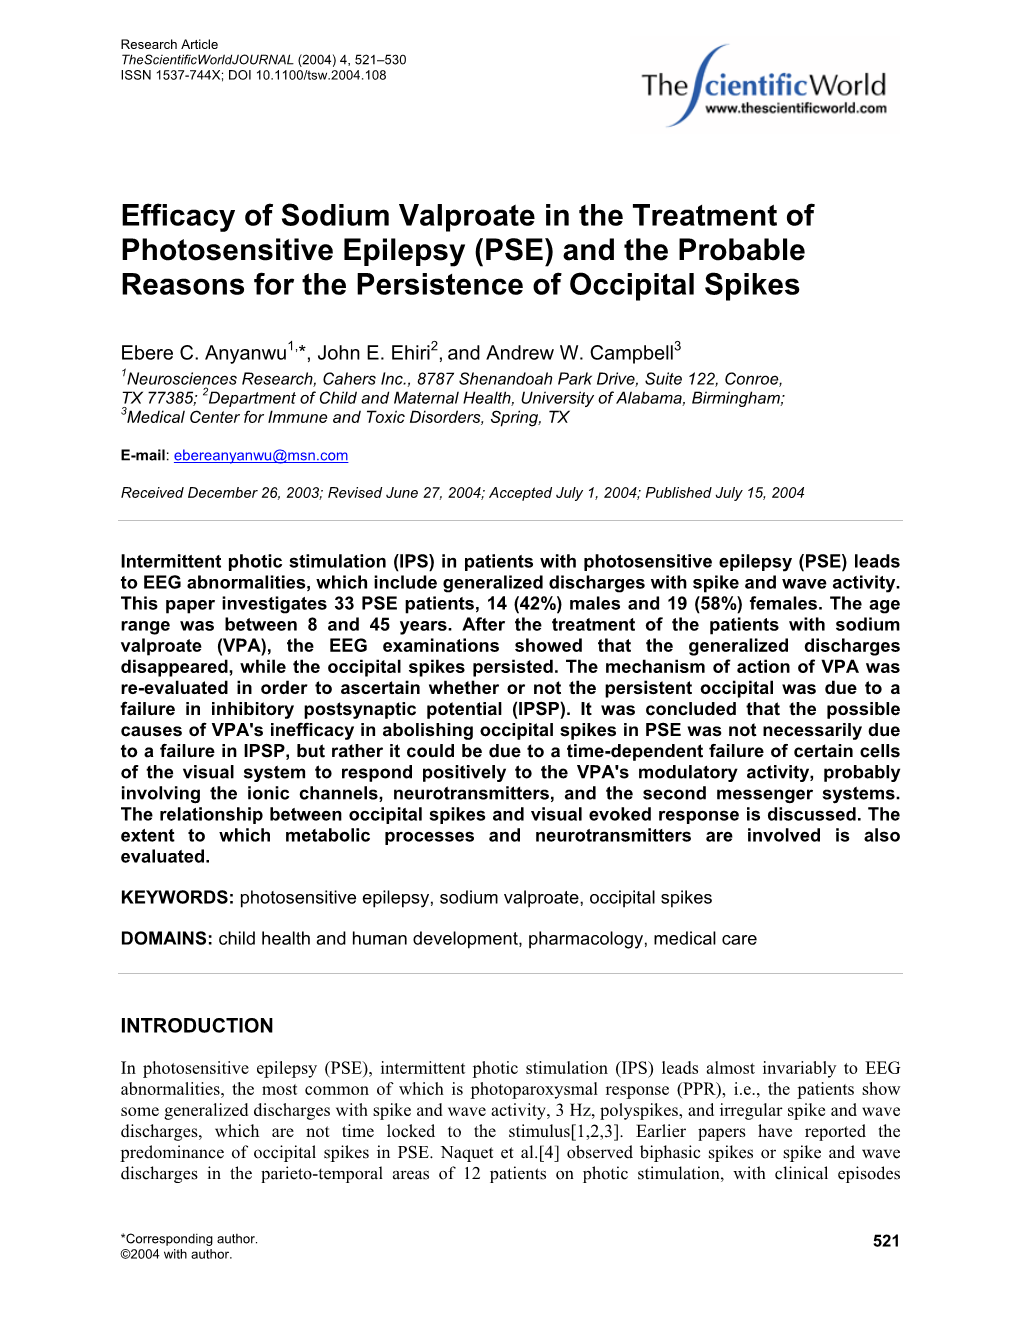 Efficacy of Sodium Valproate in the Treatment of Photosensitive Epilepsy (PSE) and the Probable Reasons for the Persistence of Occipital Spikes